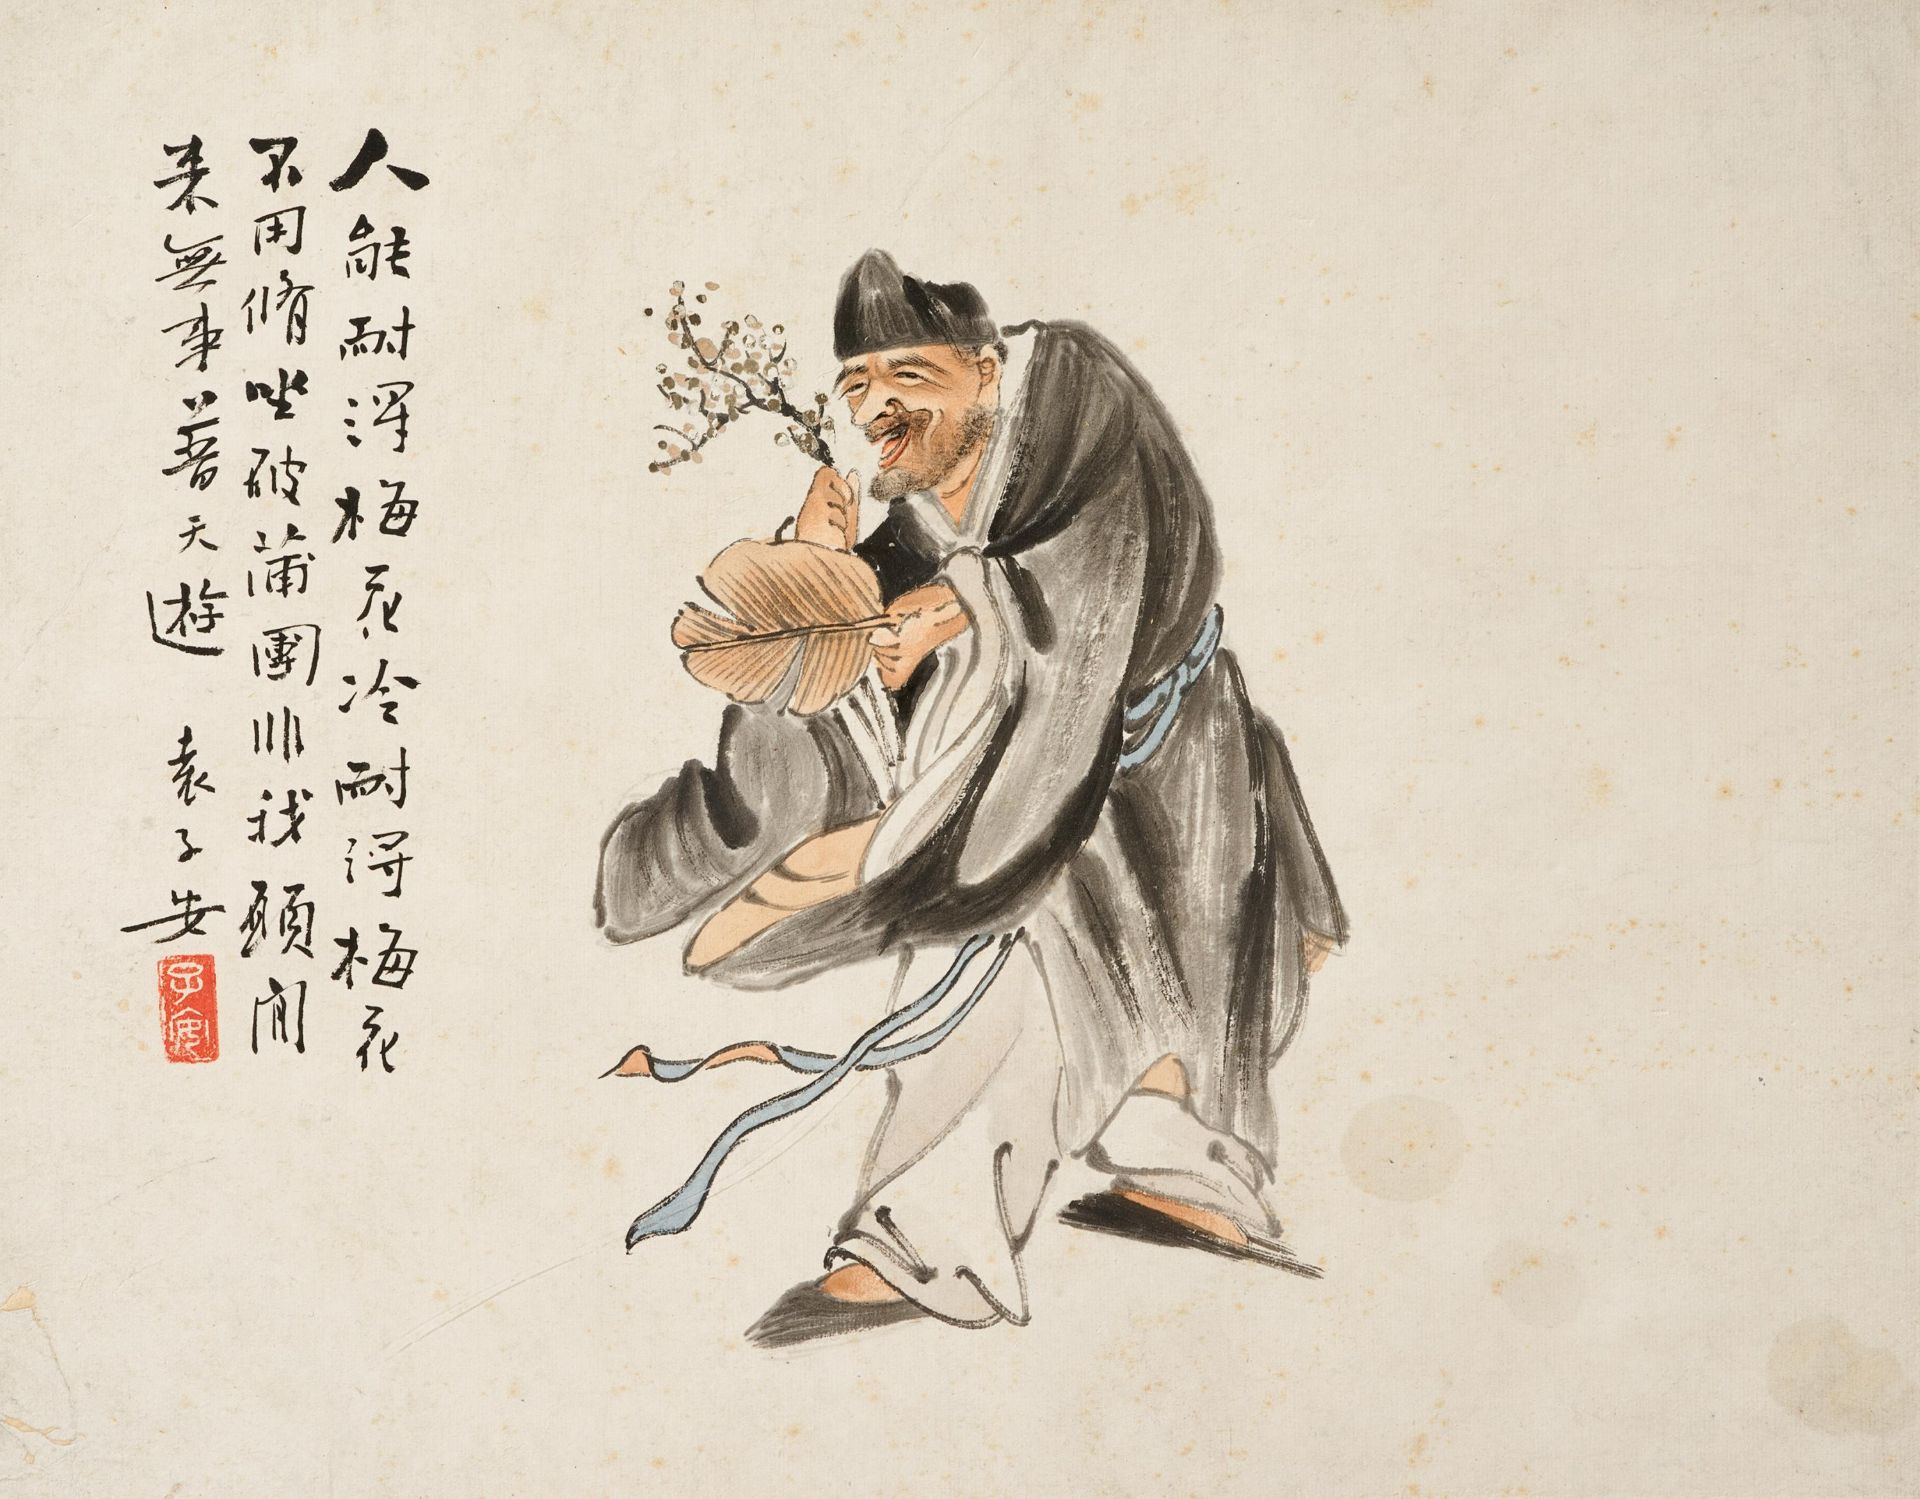 FOUR ALBUM LEAFS WITH IMMORTALS AND GENRE SCENES. China. Republic period (1912-1949). Ink and - Image 3 of 5